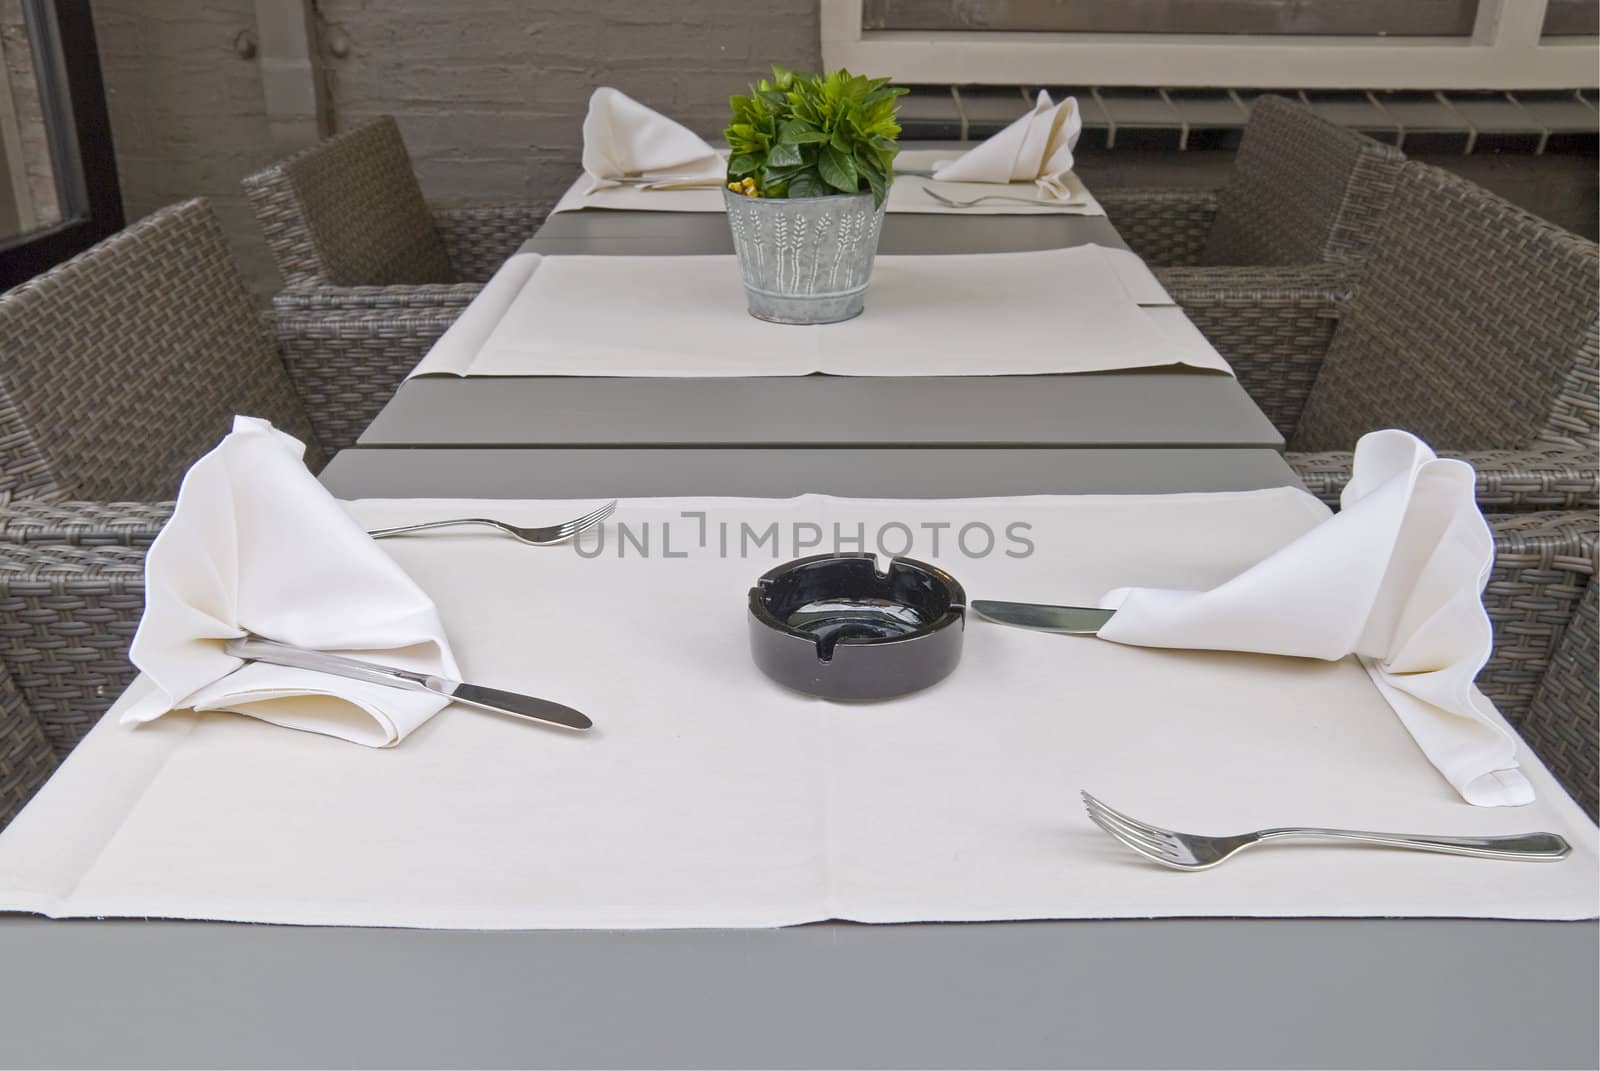 Restaurant table setting with flower and ashtray.

